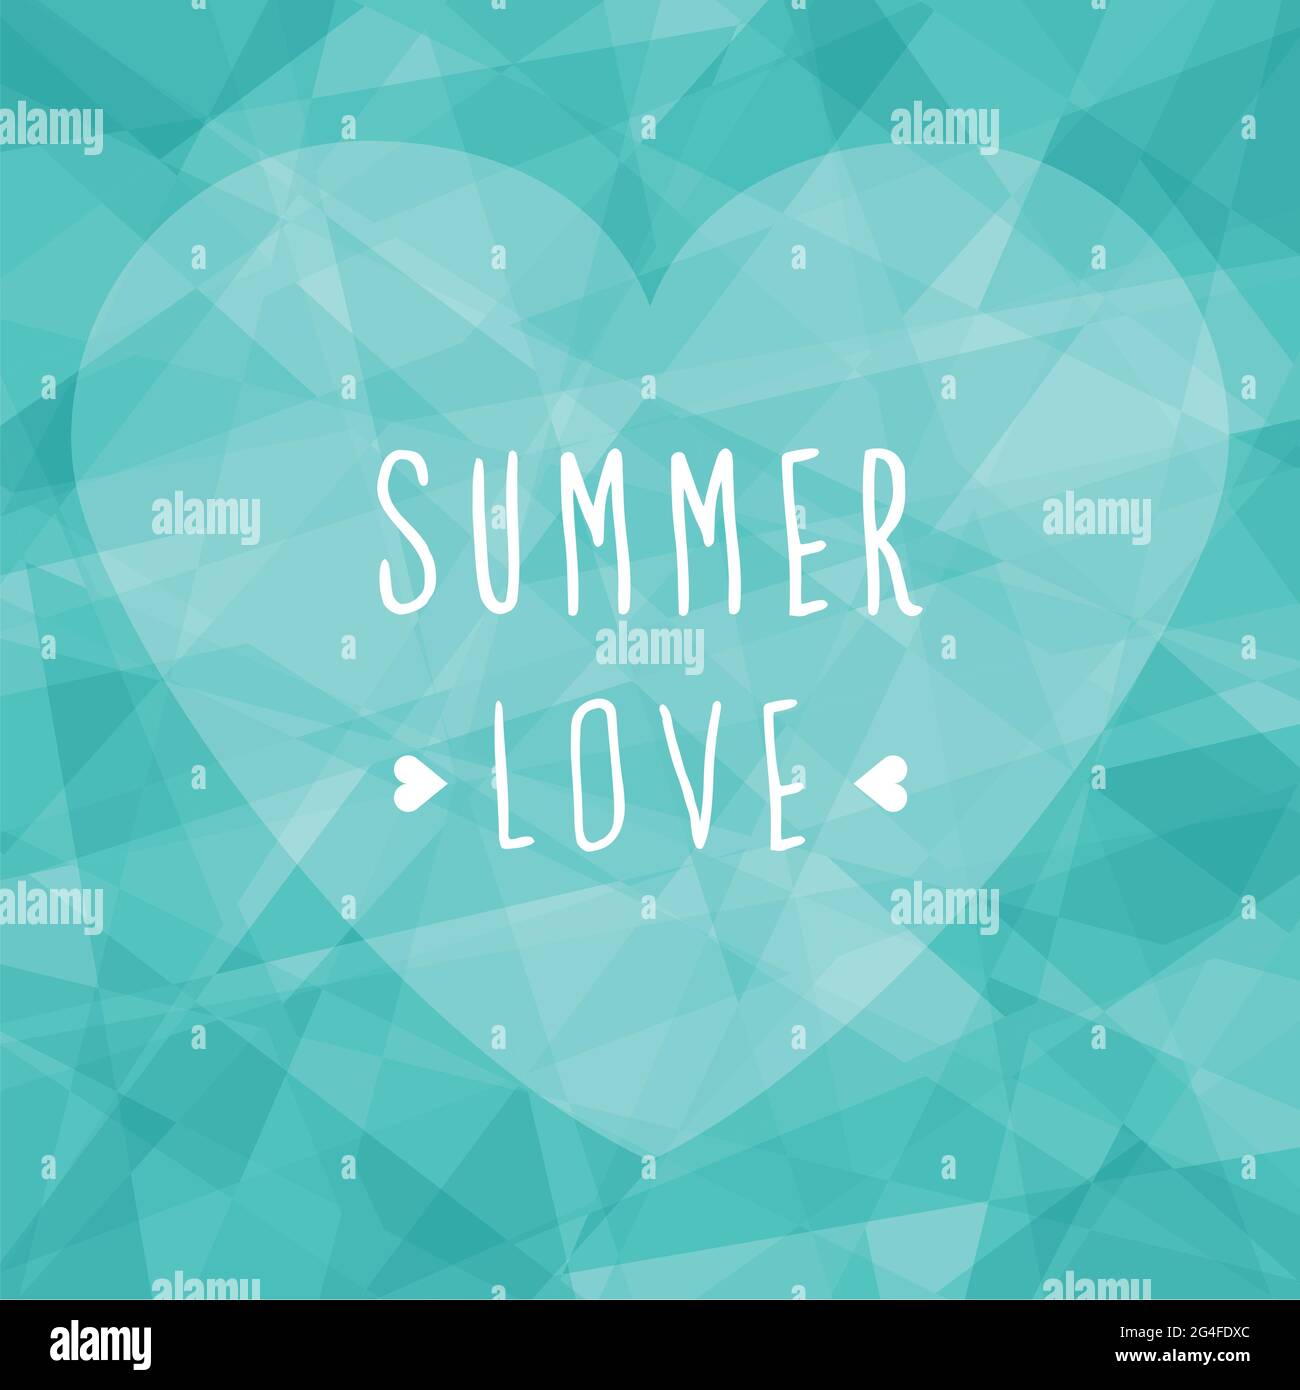 Summer love. Heart shape with text. Polygonal background. Vector illustration, flat design Stock Vector